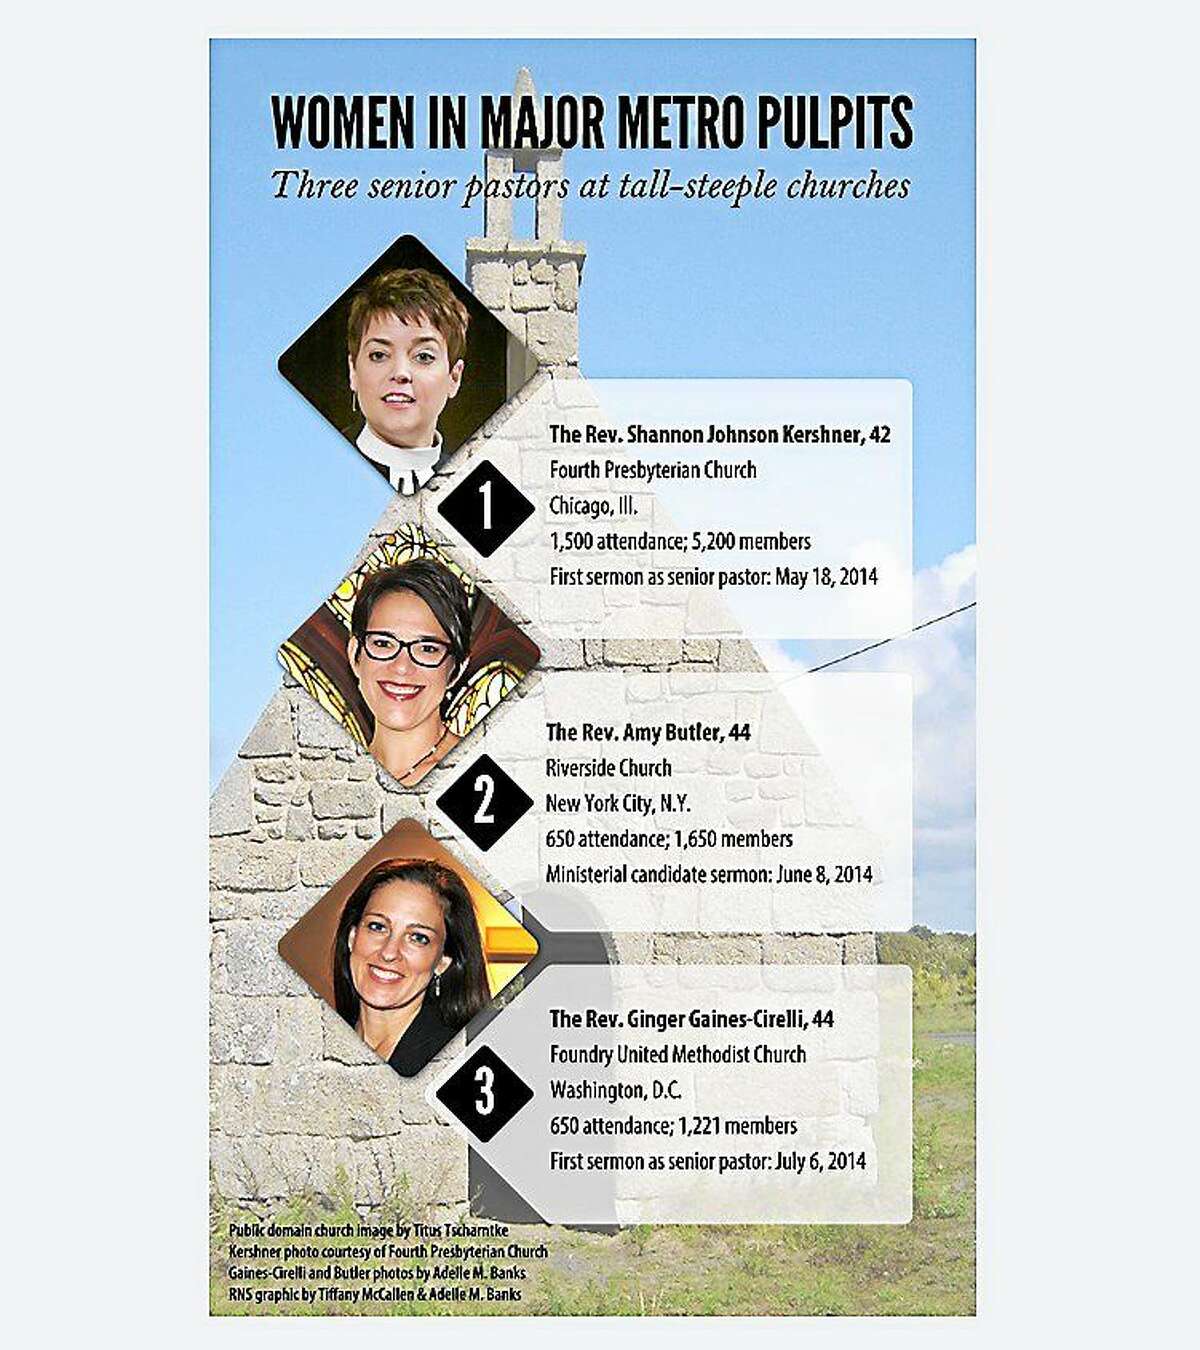 “Women in Major Metro Pulpits” graphic by Tiffany McCallen/Religion News Service.